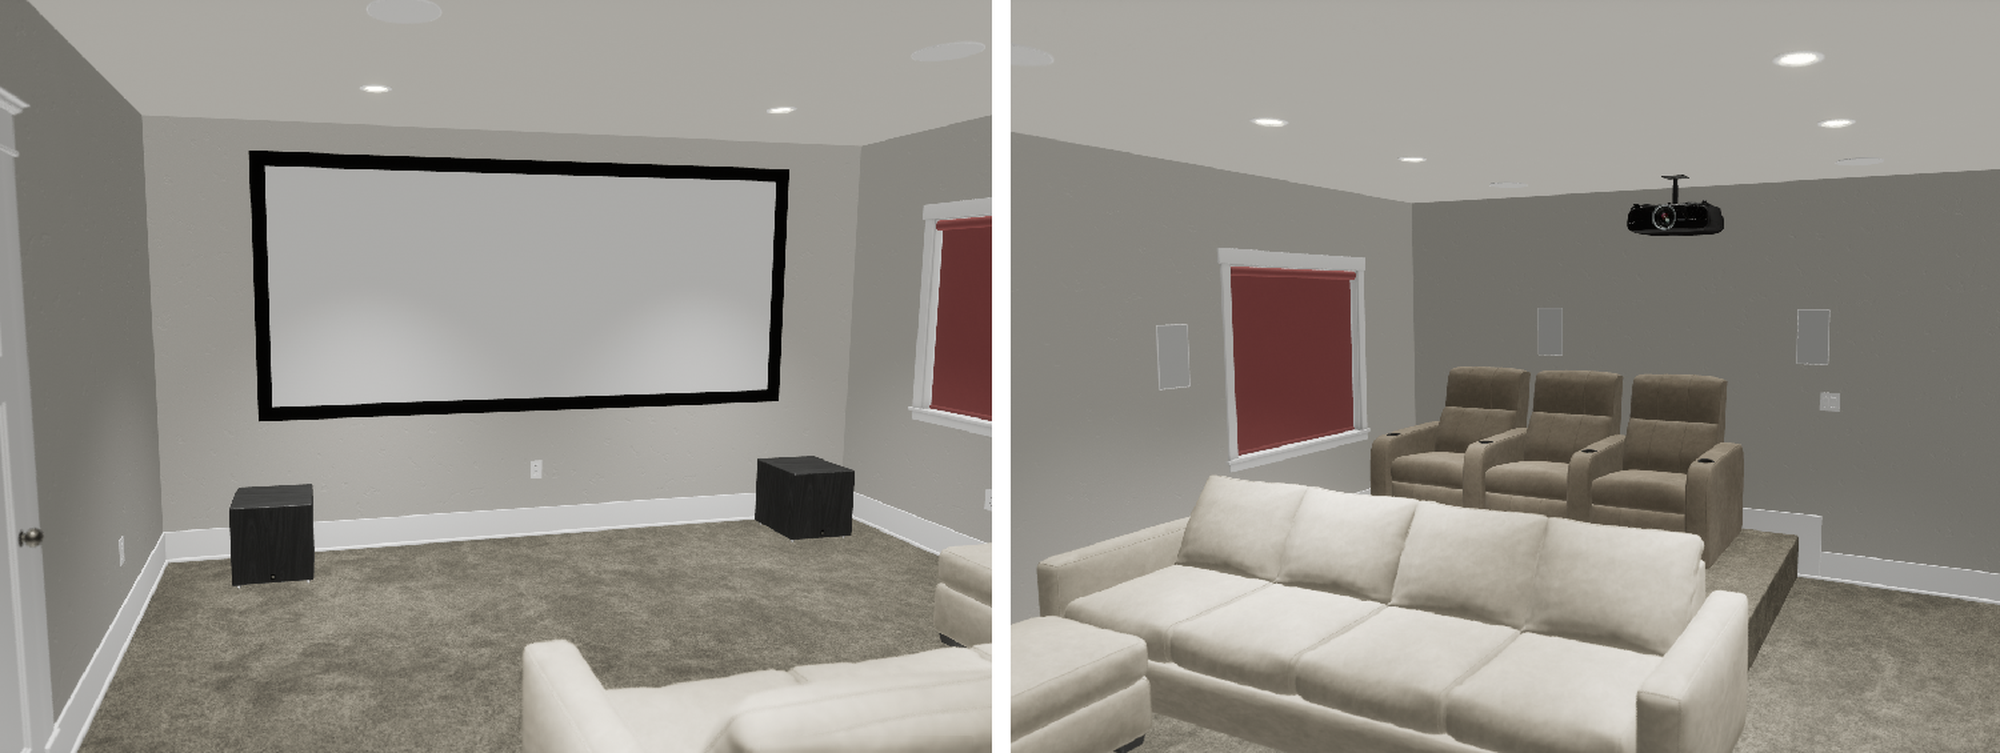 Argenta Solutions renders client’s entire home theater and vision, earning them $15,000 project.